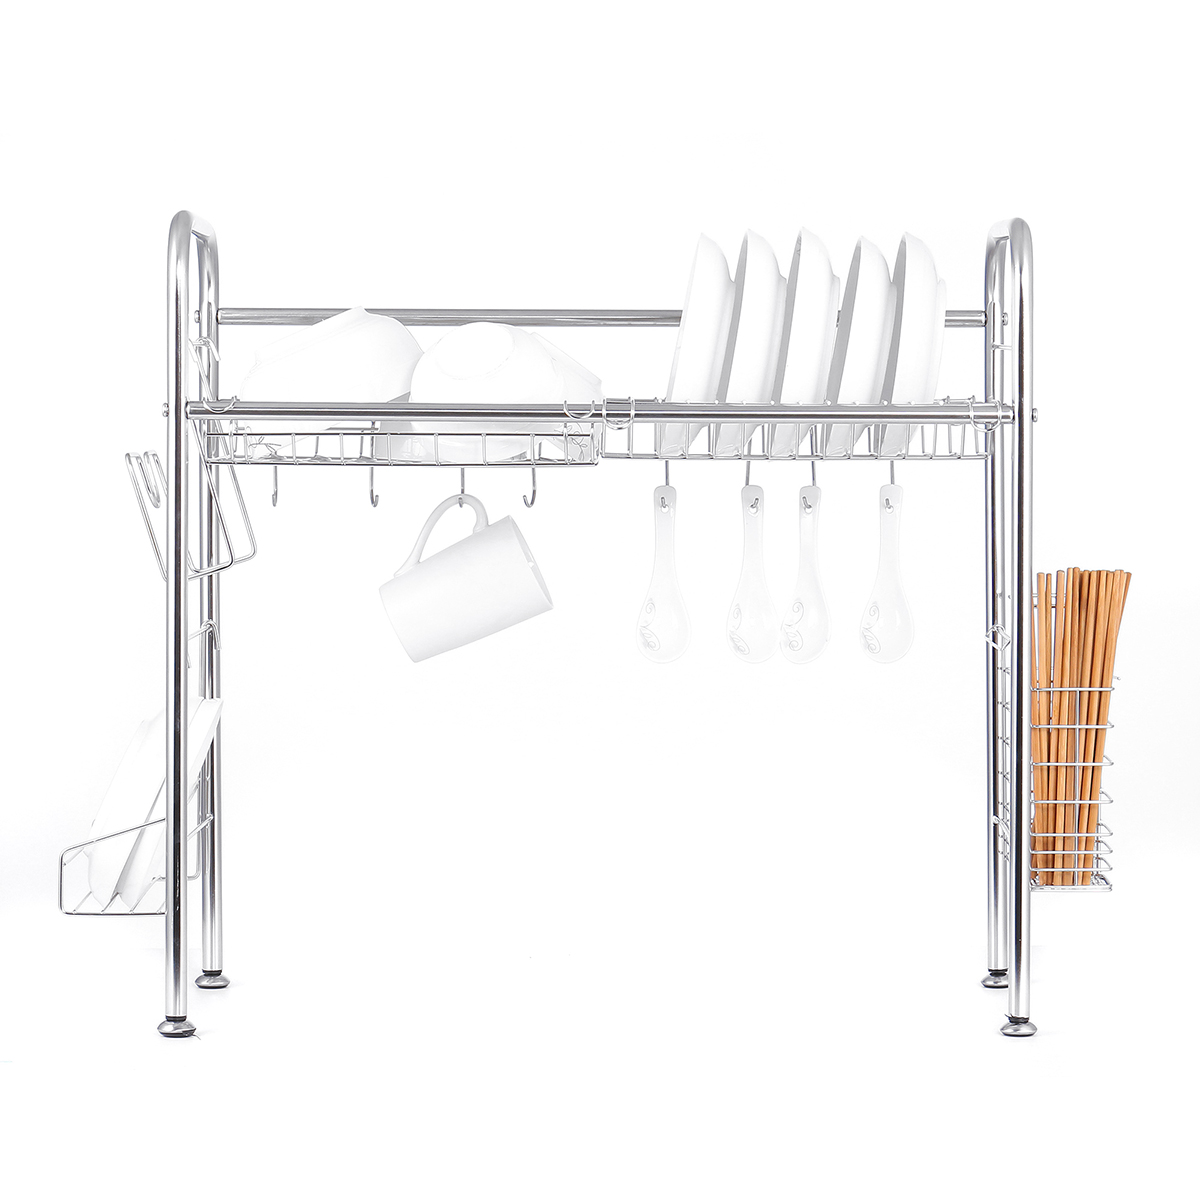 647484cm-Double-Layer-Stainless-Steel-Rack-Shelf-Storage-for-Kitchen-Dishes-Arrangement-1671407-4